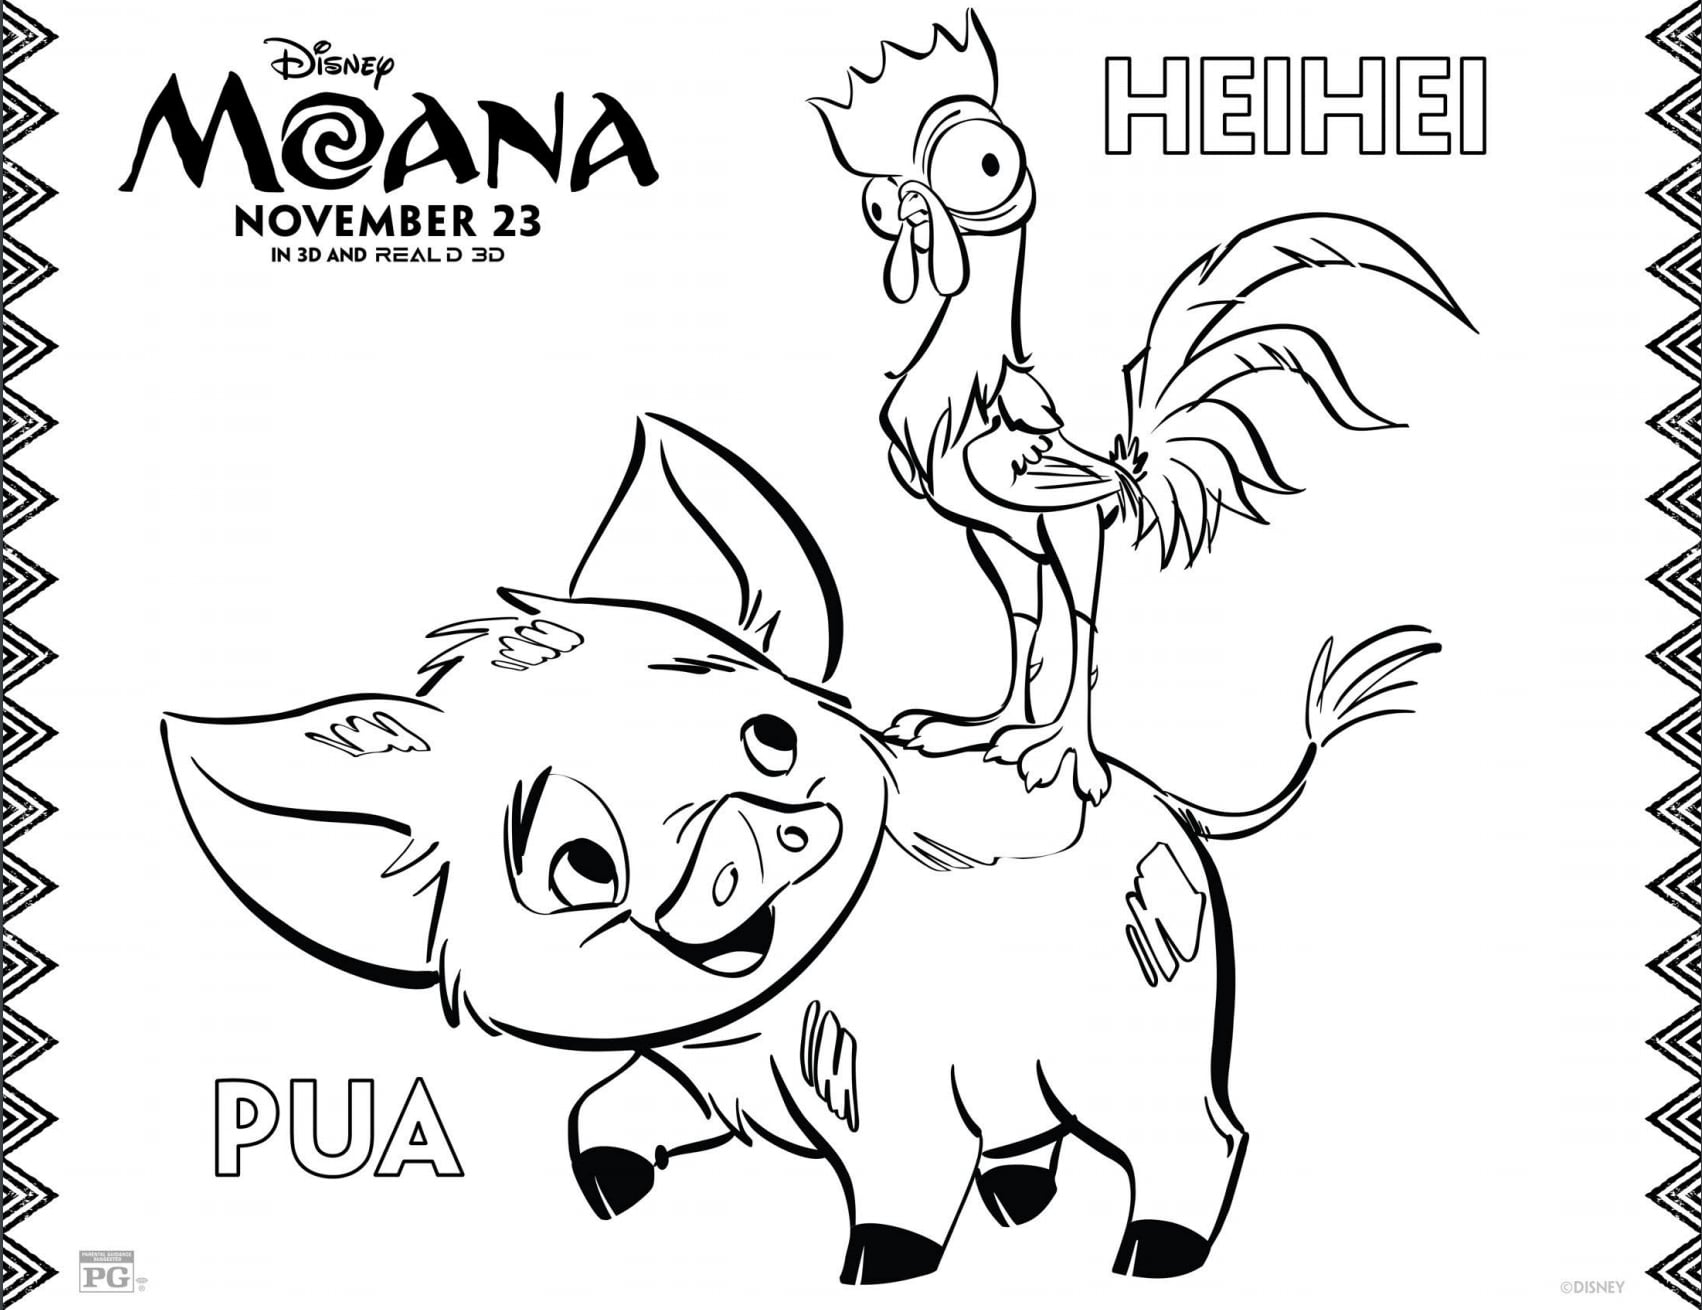 Pua And Heihei Printable Moana Coloring Sheet Bring A Little Bit Of Disney Magic To Playtime With These Printable Moana Coloring Pages Popsugar Family Photo 5